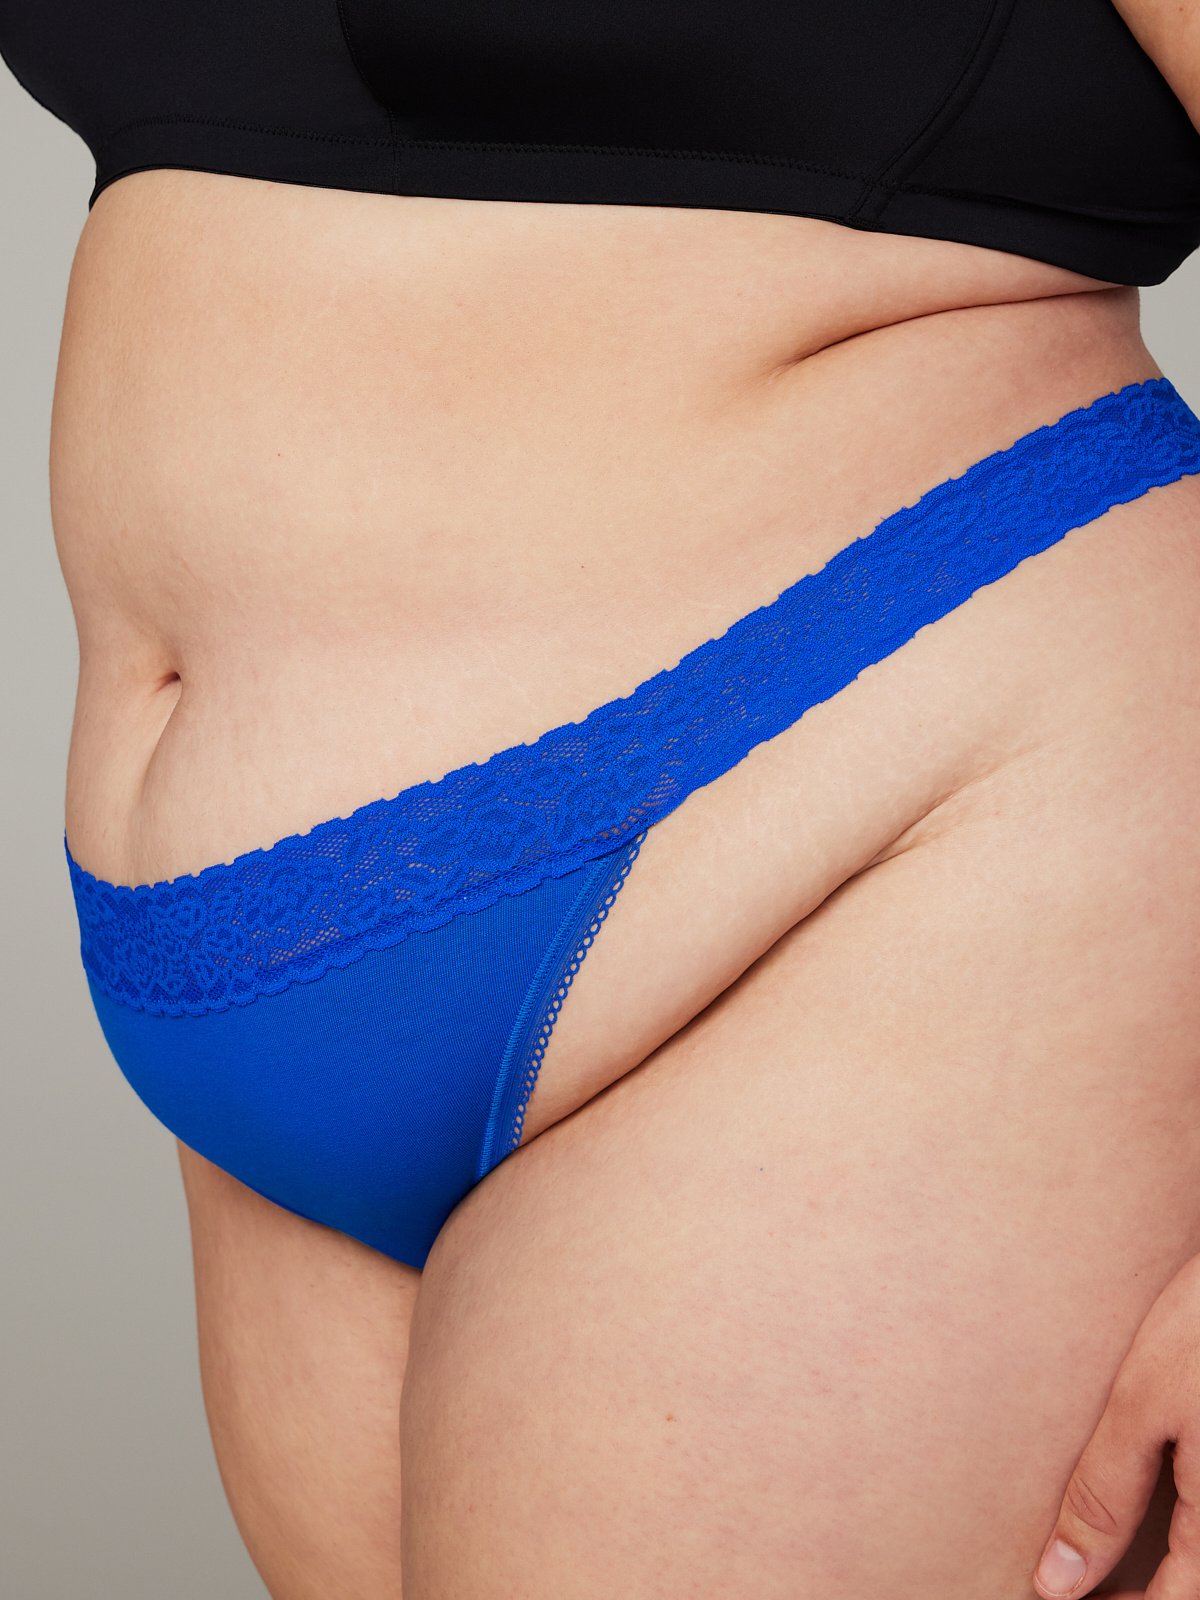 Elevate Your Style with Plus Scalloped Trim Panty